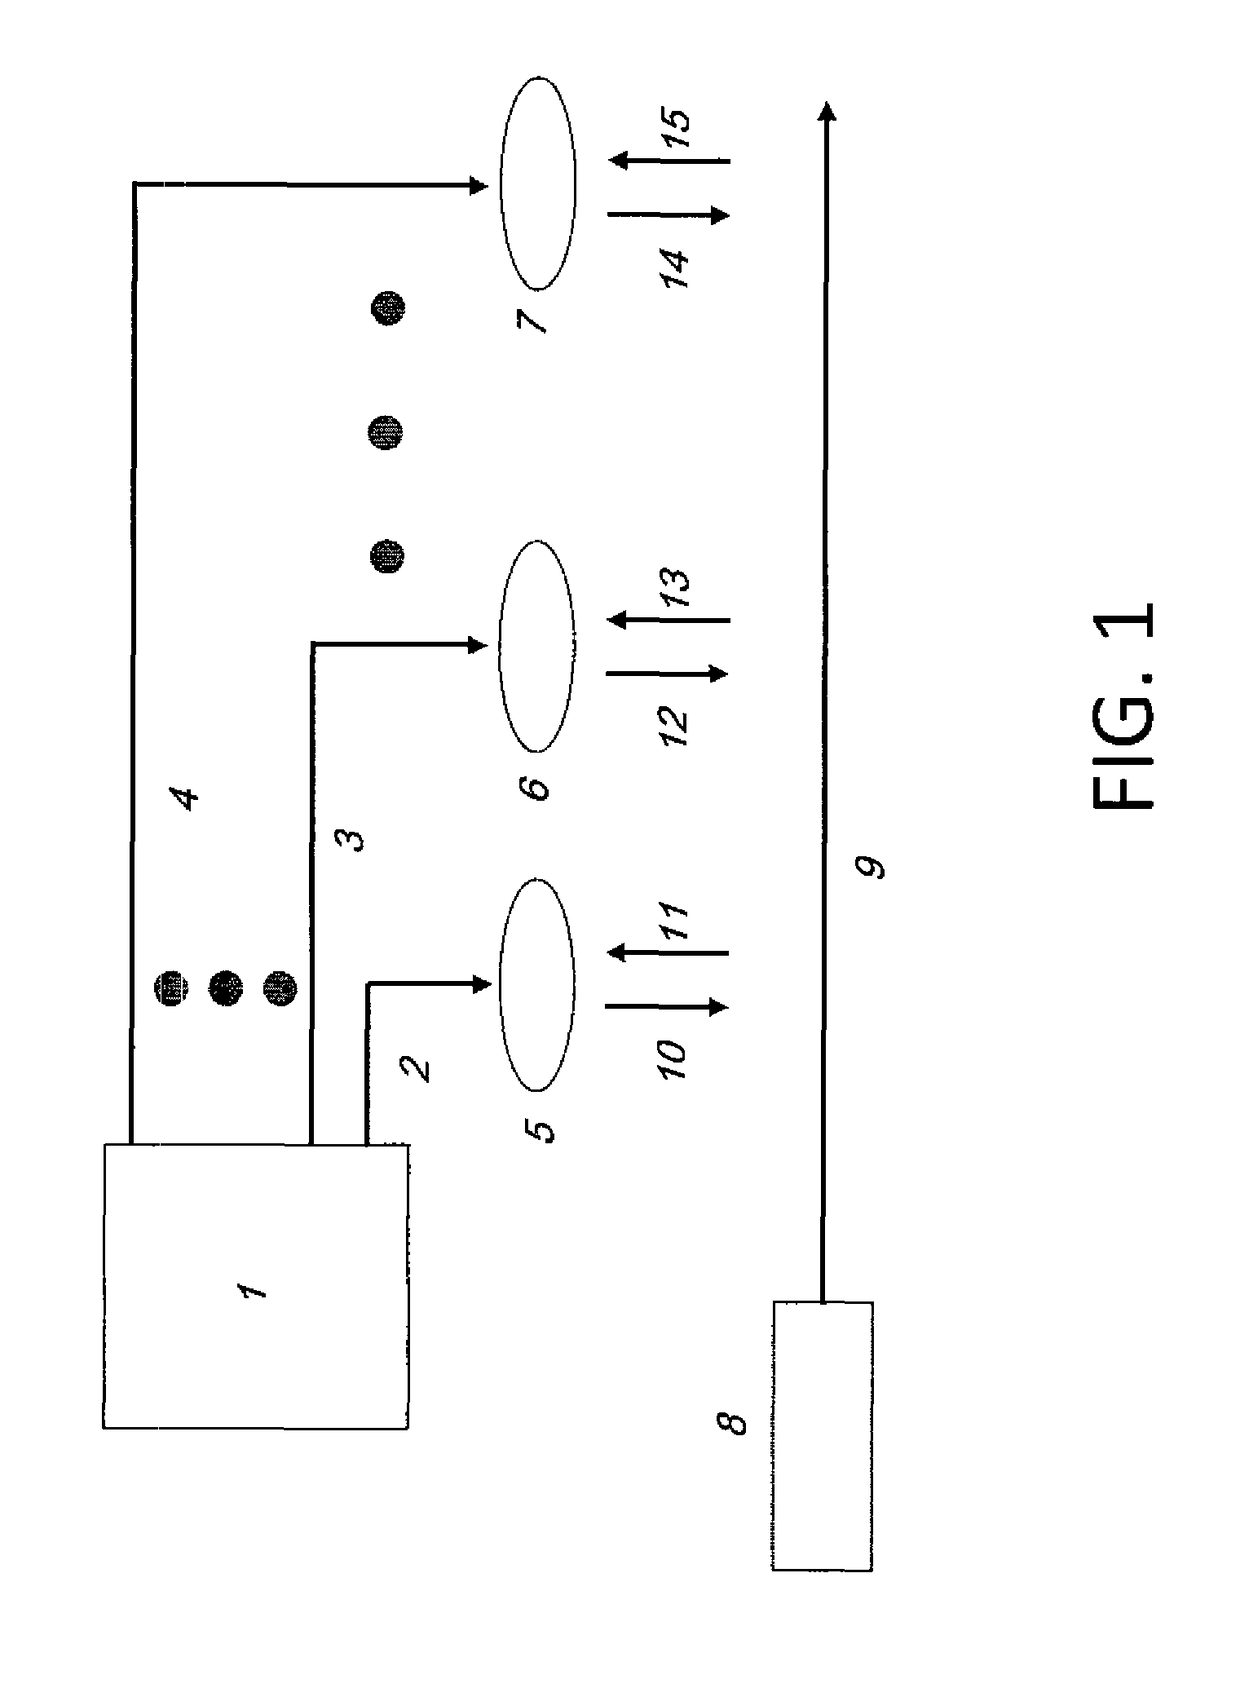 Apparatus and method for improving detection precision in laser vibrometric studies